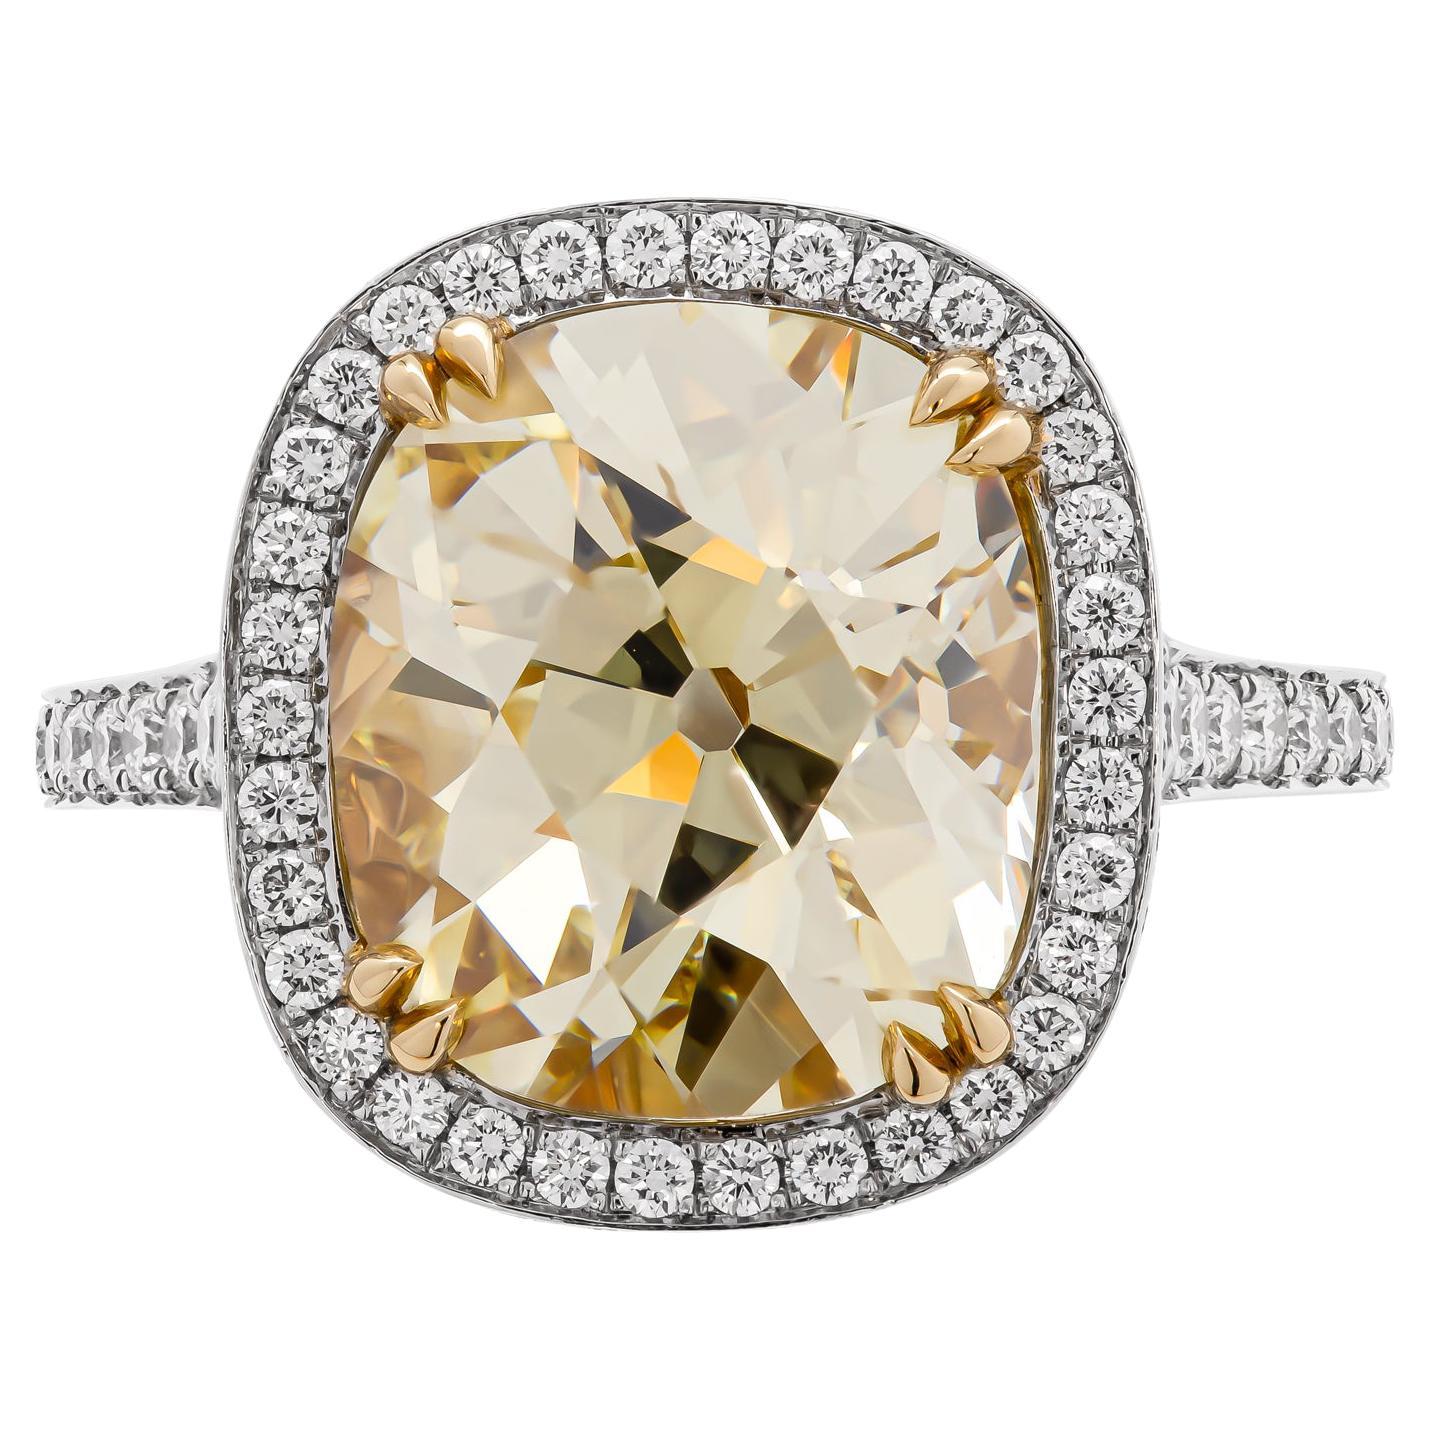 Mounted in handmade custom design setting featuring Platinum 950 & 18K Yellow Gold, diamond cathedral shank with diamonds, that forms beautiful gallery under center stone, a true piece of art, Double Edge Halo around center stone makes it appear